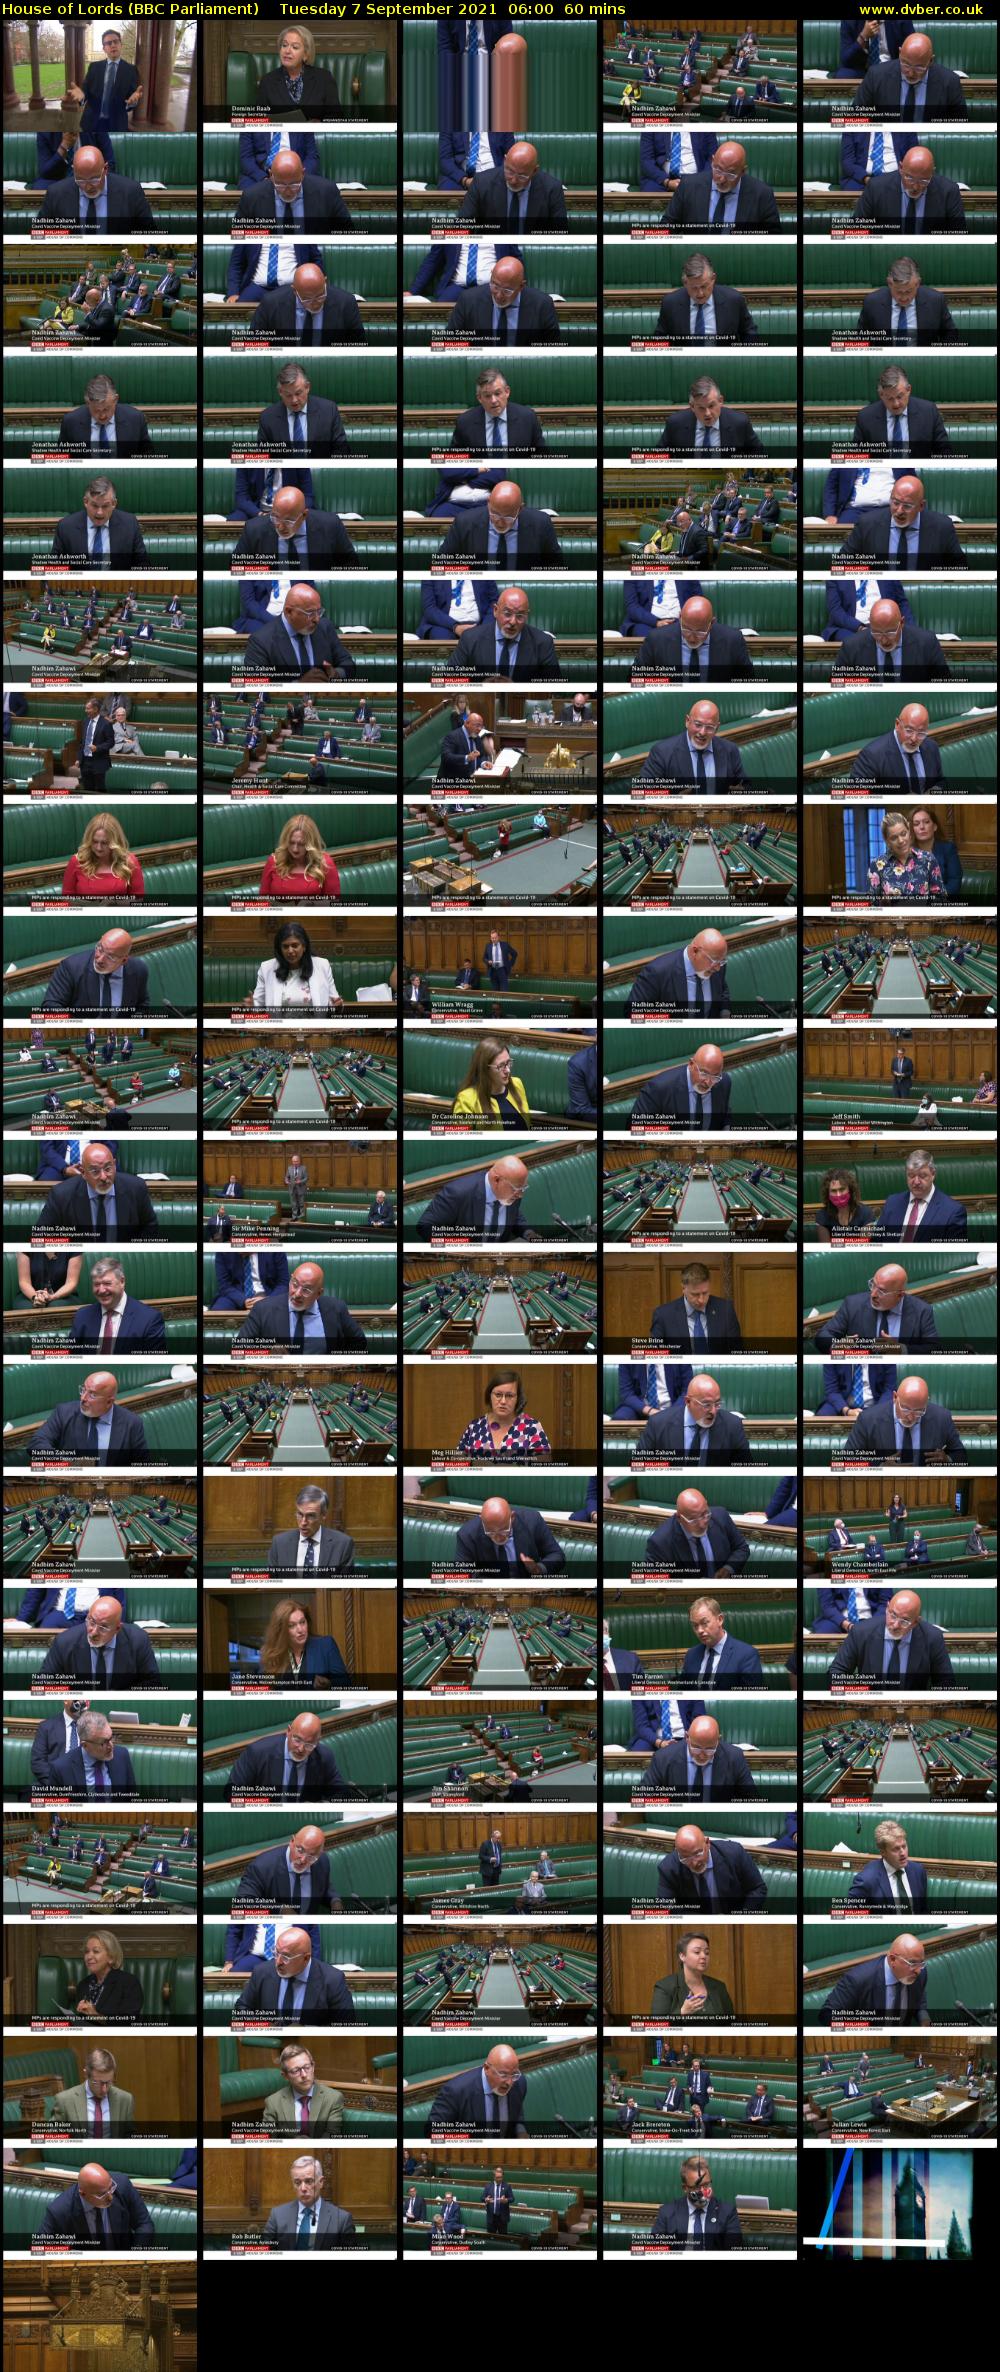 House of Lords (BBC Parliament) Tuesday 7 September 2021 06:00 - 07:00